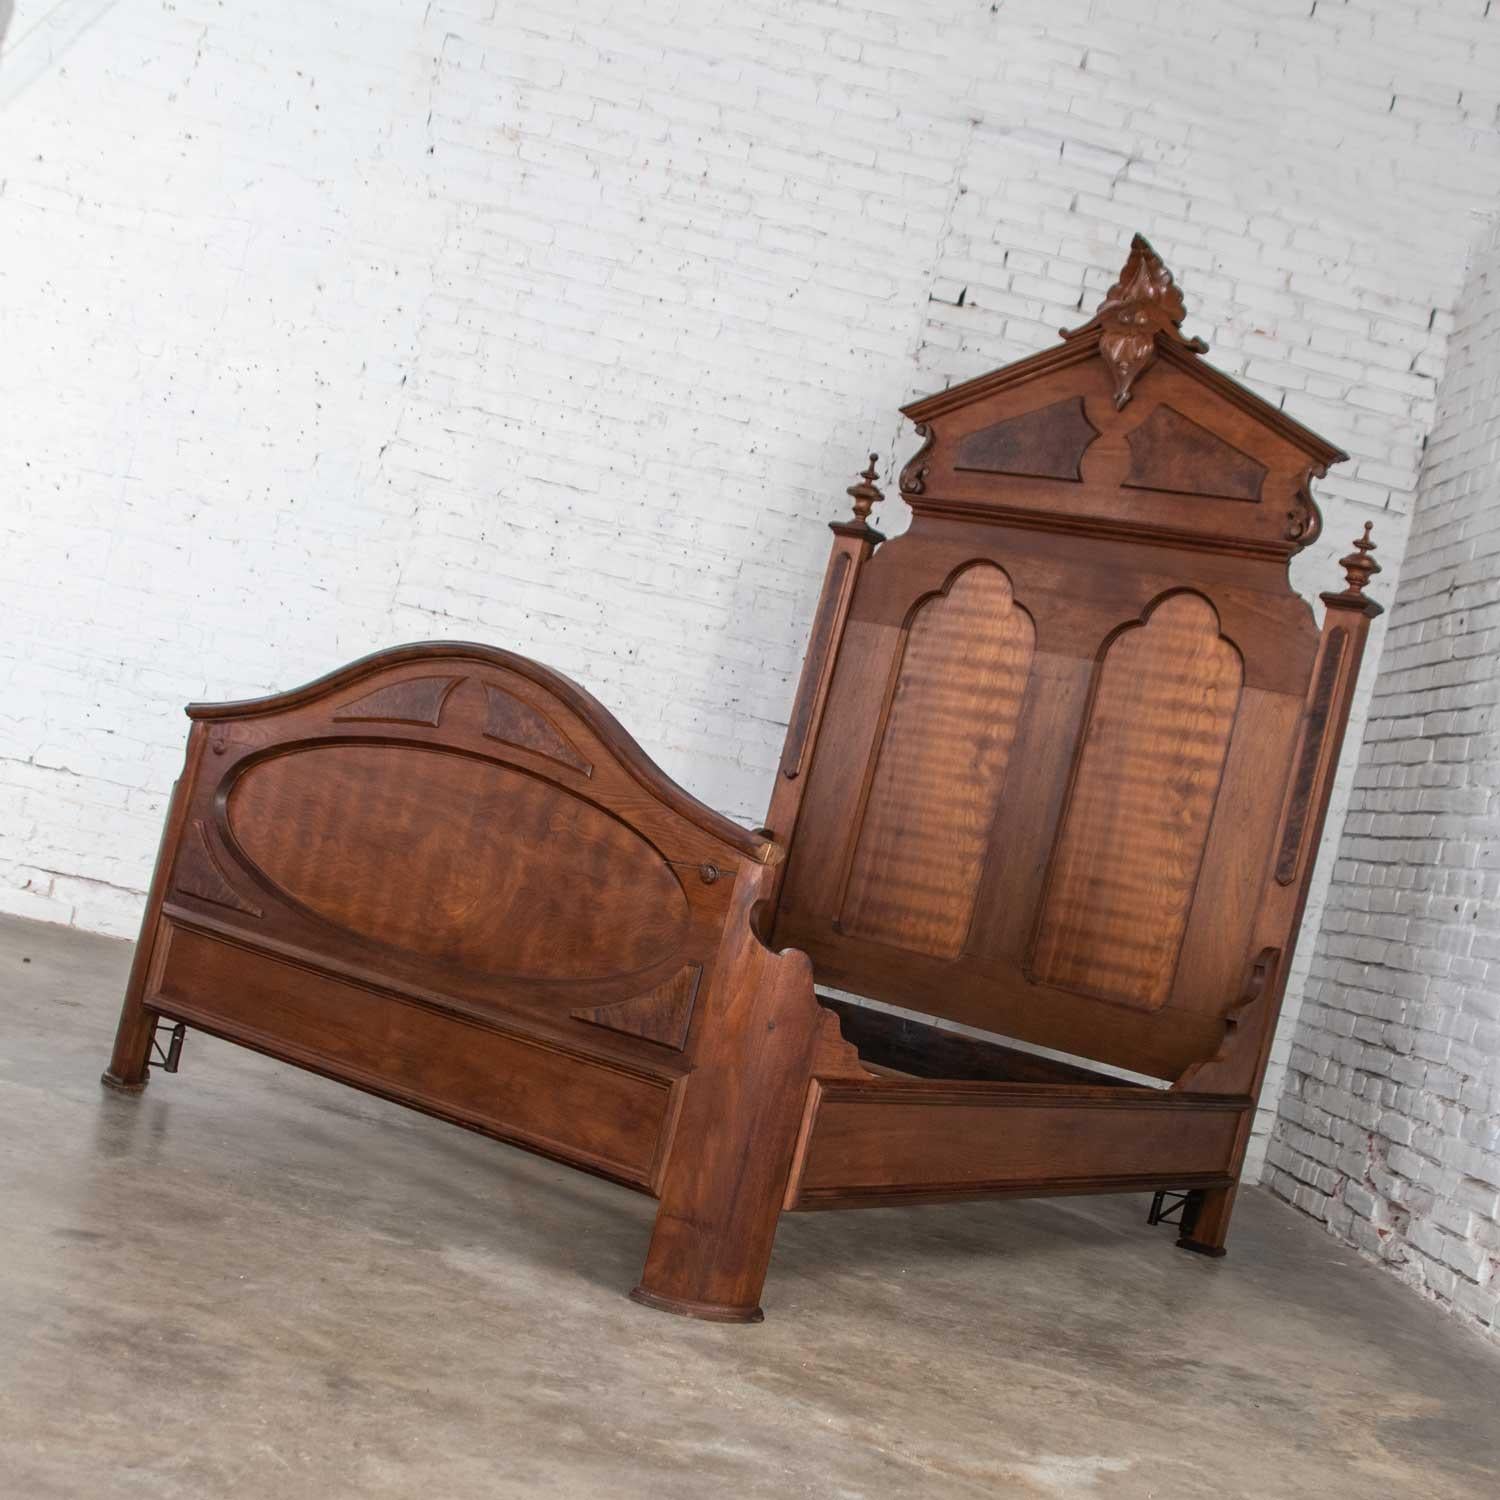 Gorgeous antique Victorian tall Lincoln style full size bed in solid walnut and walnut burl with footboard and side rails. It is in wonderful original vintage condition. That does not mean it is without beautiful age patina of marks and distressing